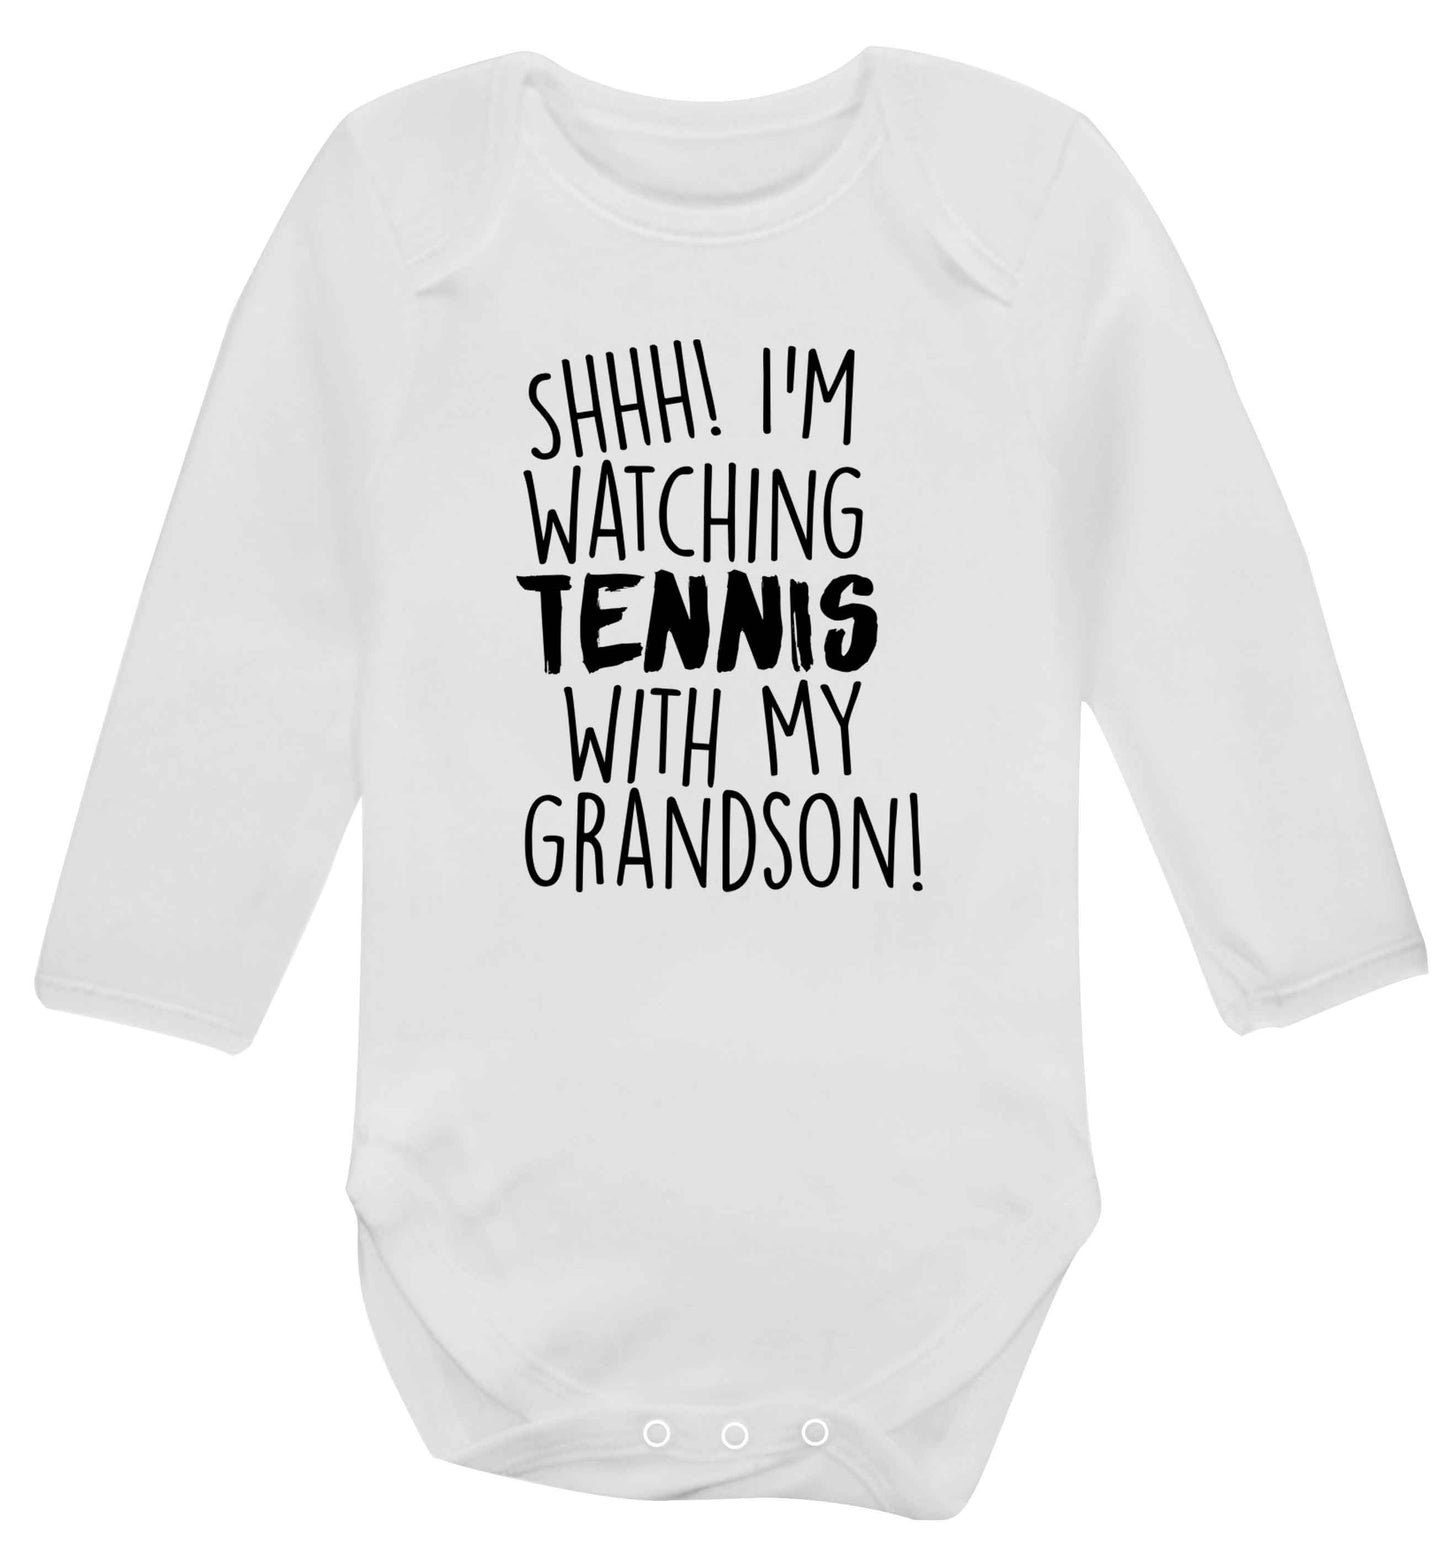 Shh! I'm watching tennis with my grandson! Baby Vest long sleeved white 6-12 months